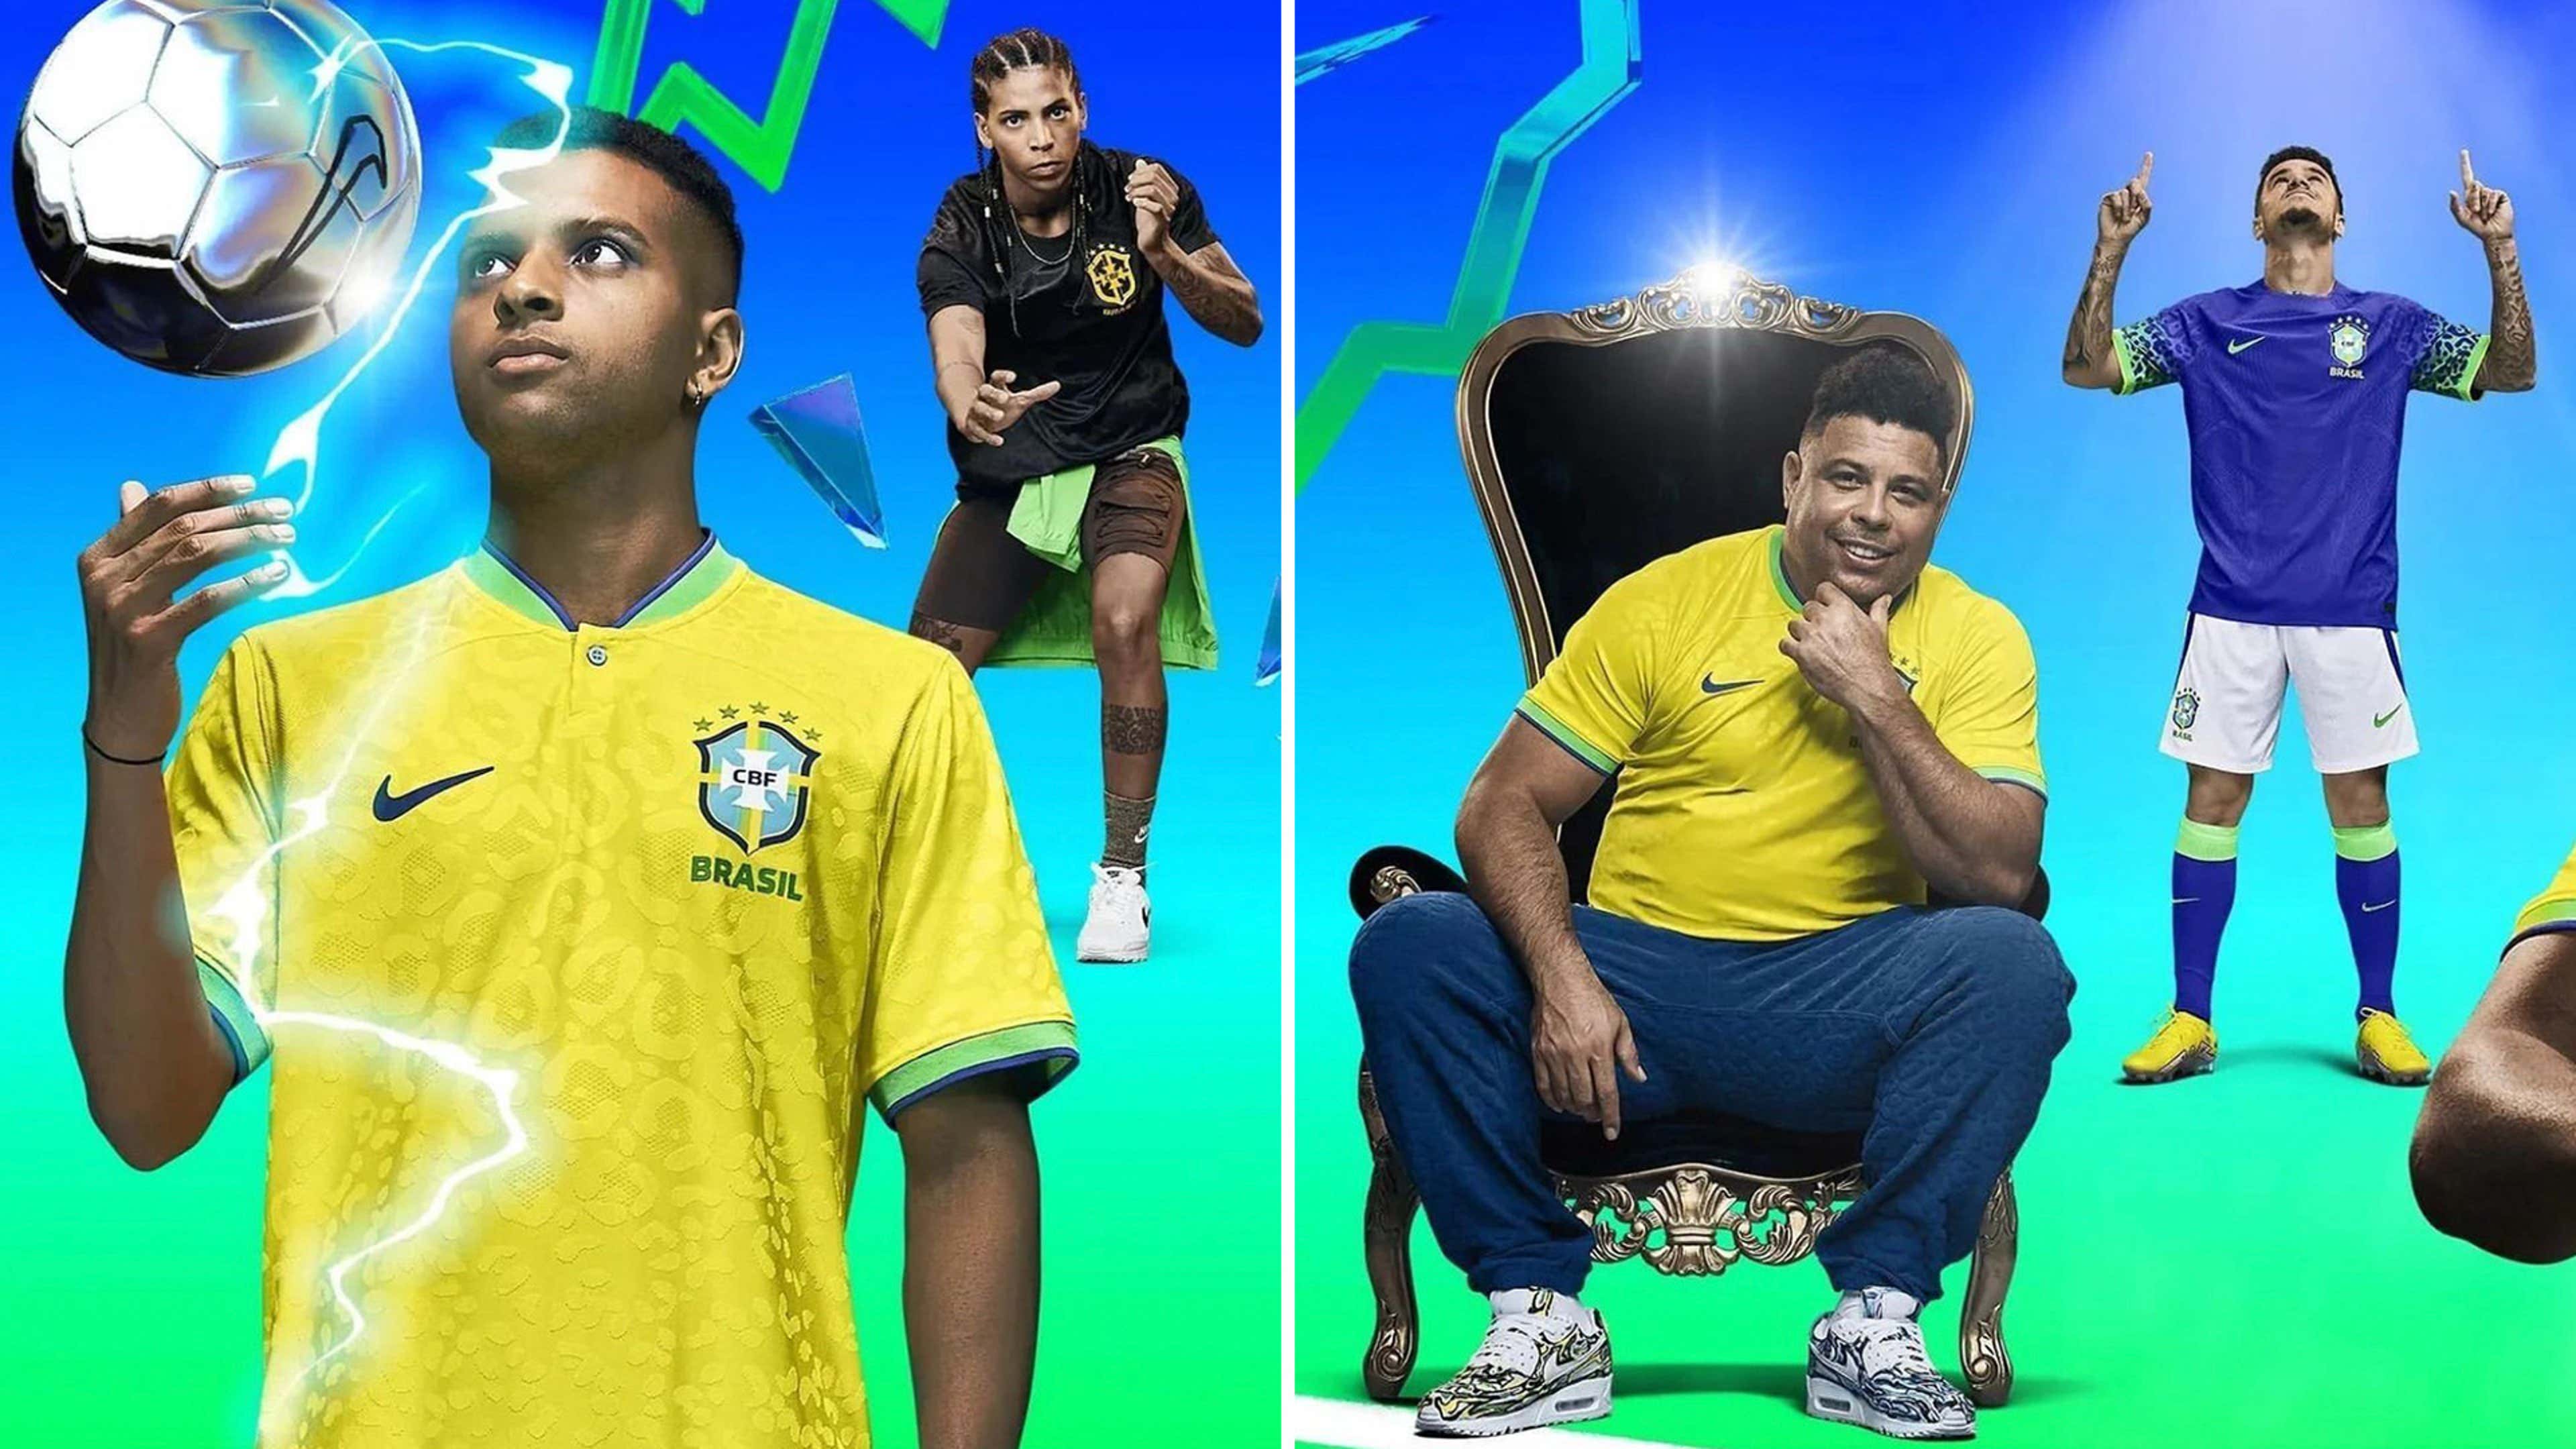 NIKE BRAZIL AWAY JERSEY FIFA CONFEDERATIONS CUP 2013